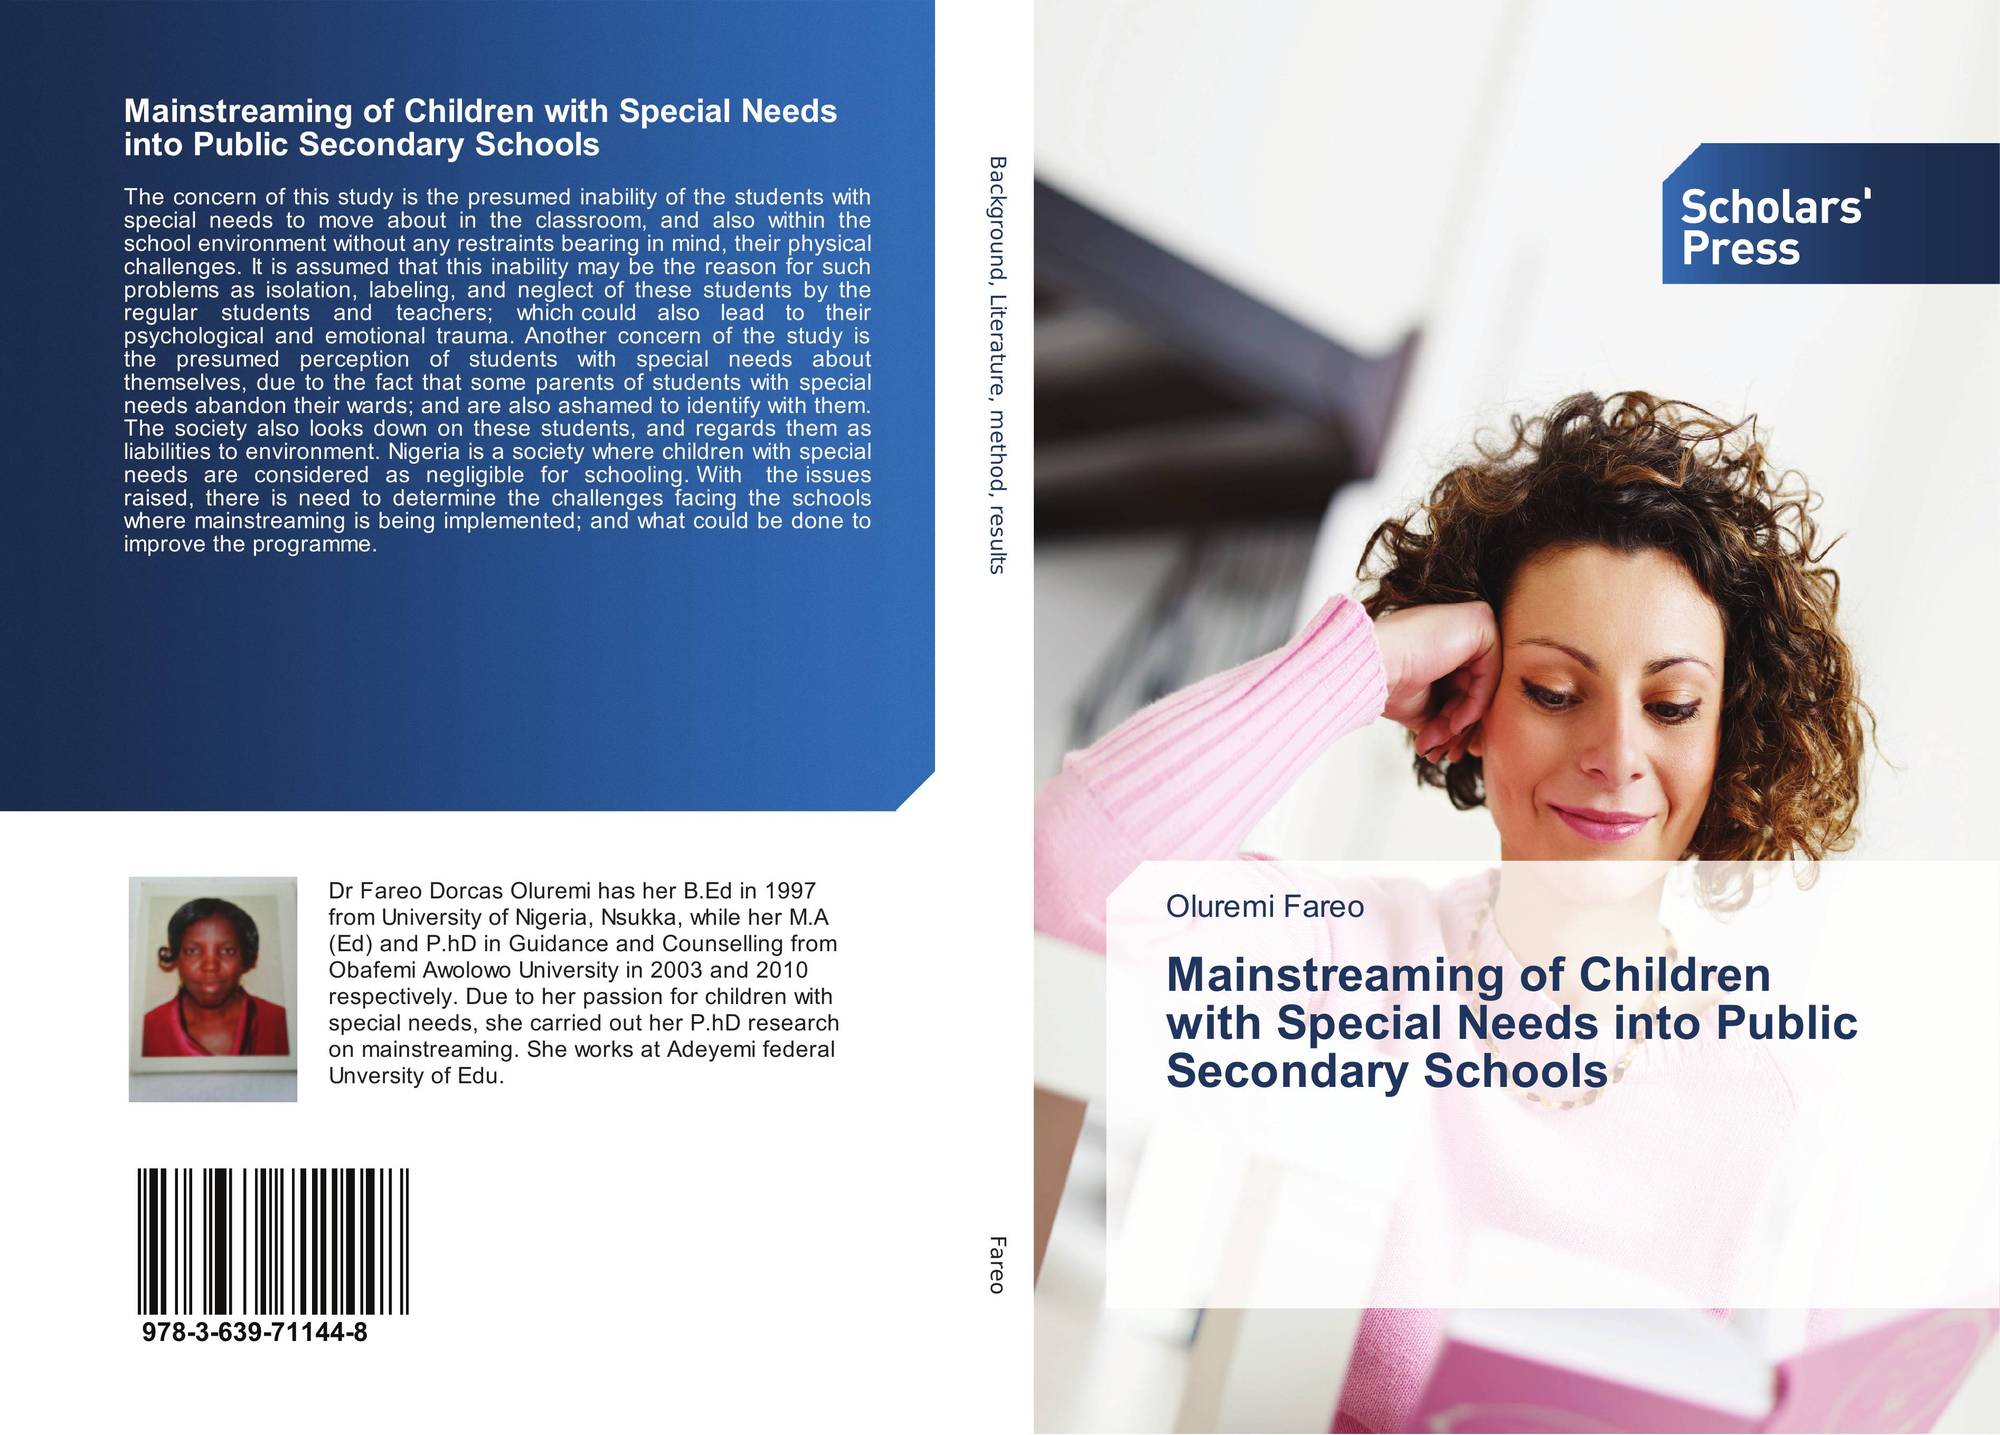 Mainstreaming: The Importance Of Special Education